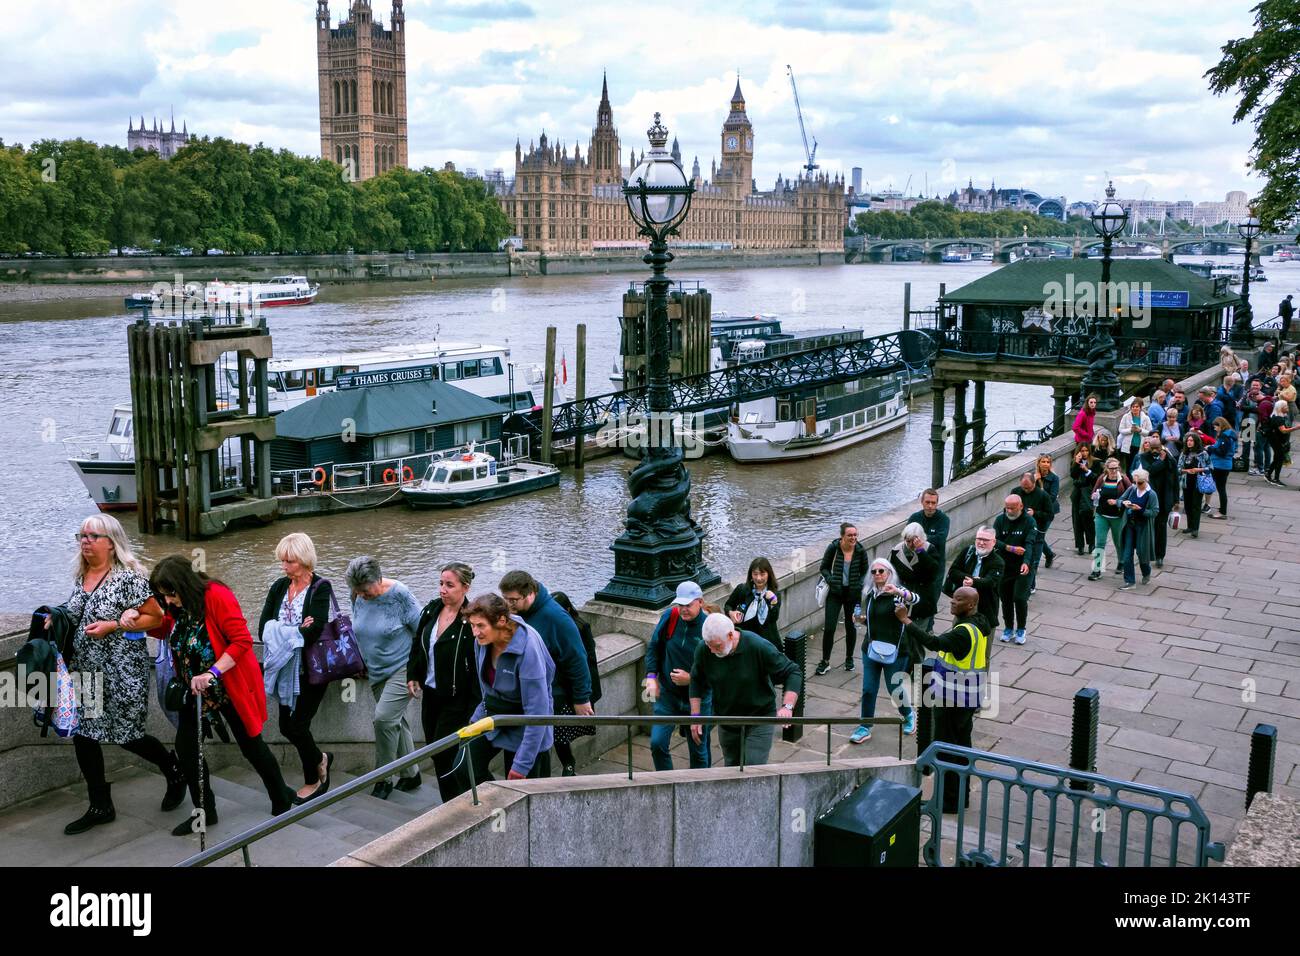 The Laying in State queue of people waiting to pay their respects to HRH Queen Elizabeth II.Lambeth Bridge London UK Stock Photo